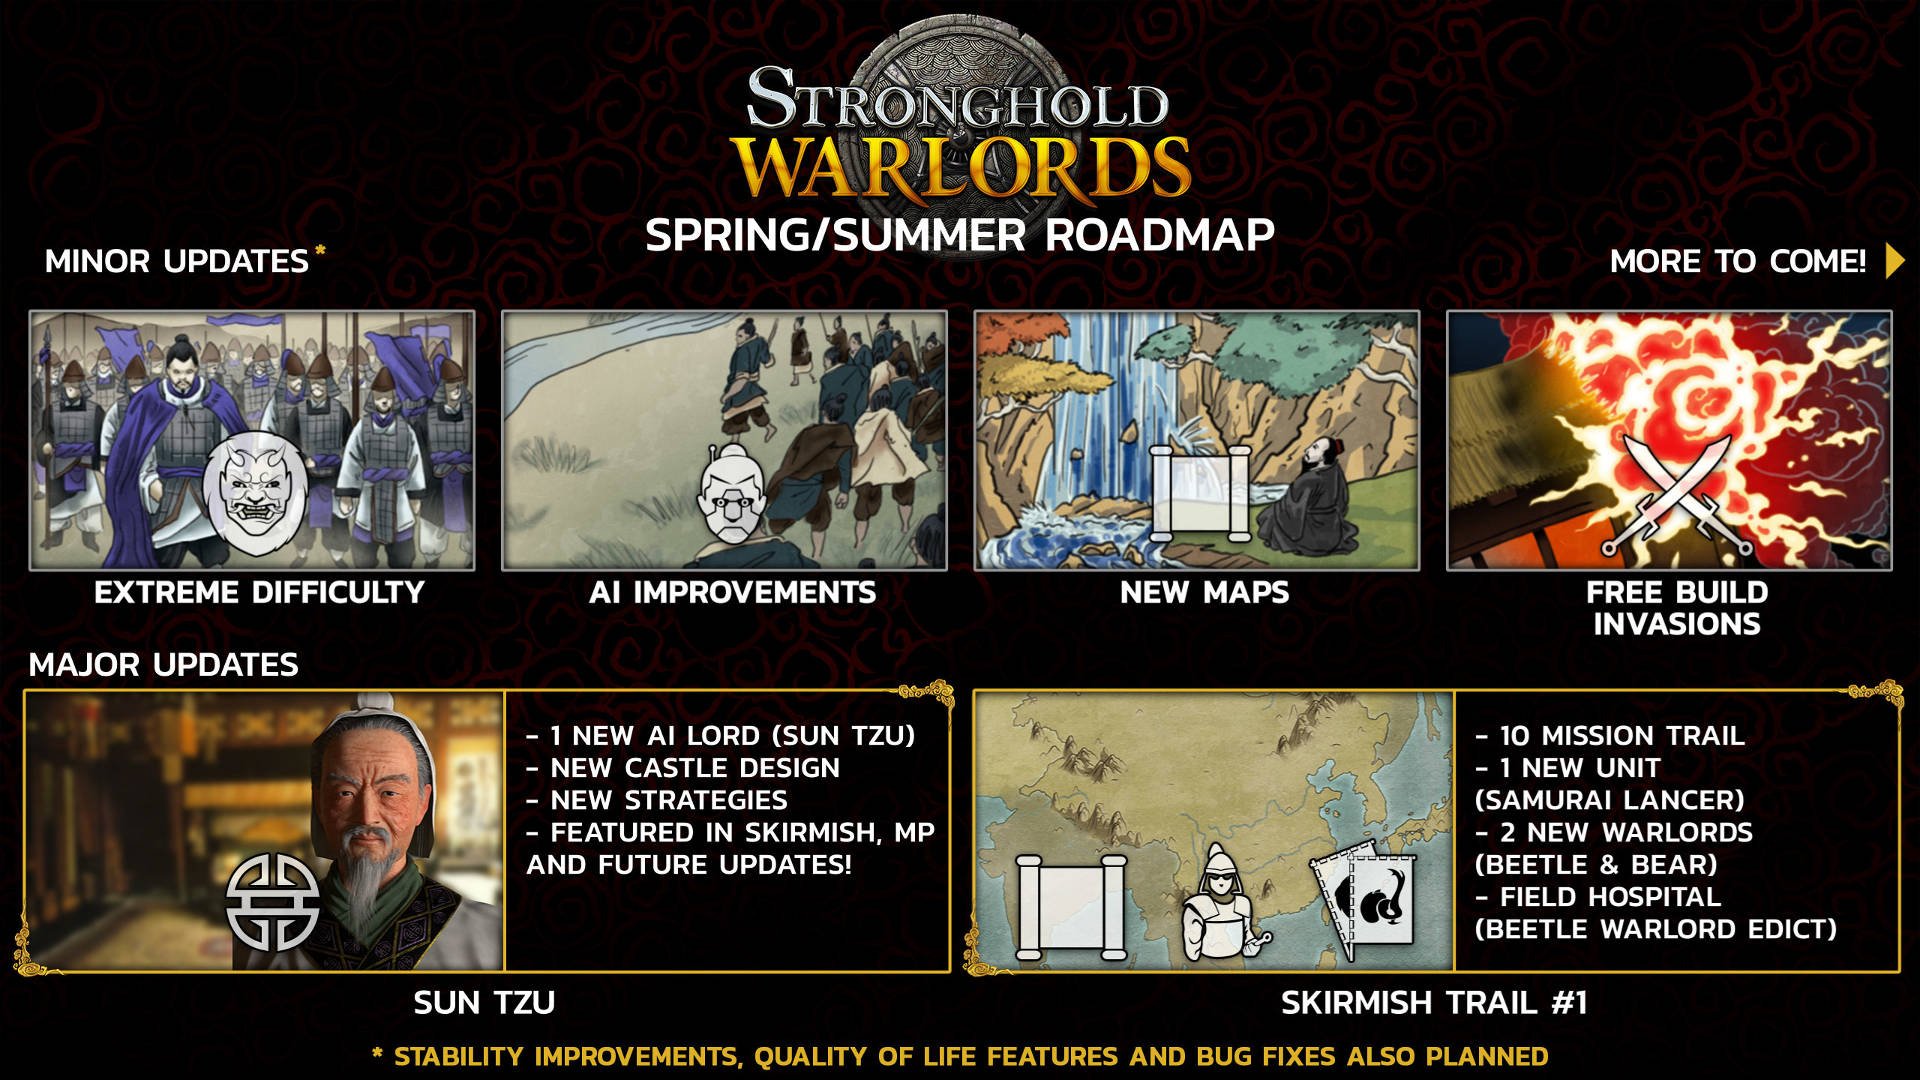 Stronghold: Warlords Roadmap Spring-Summer 2021